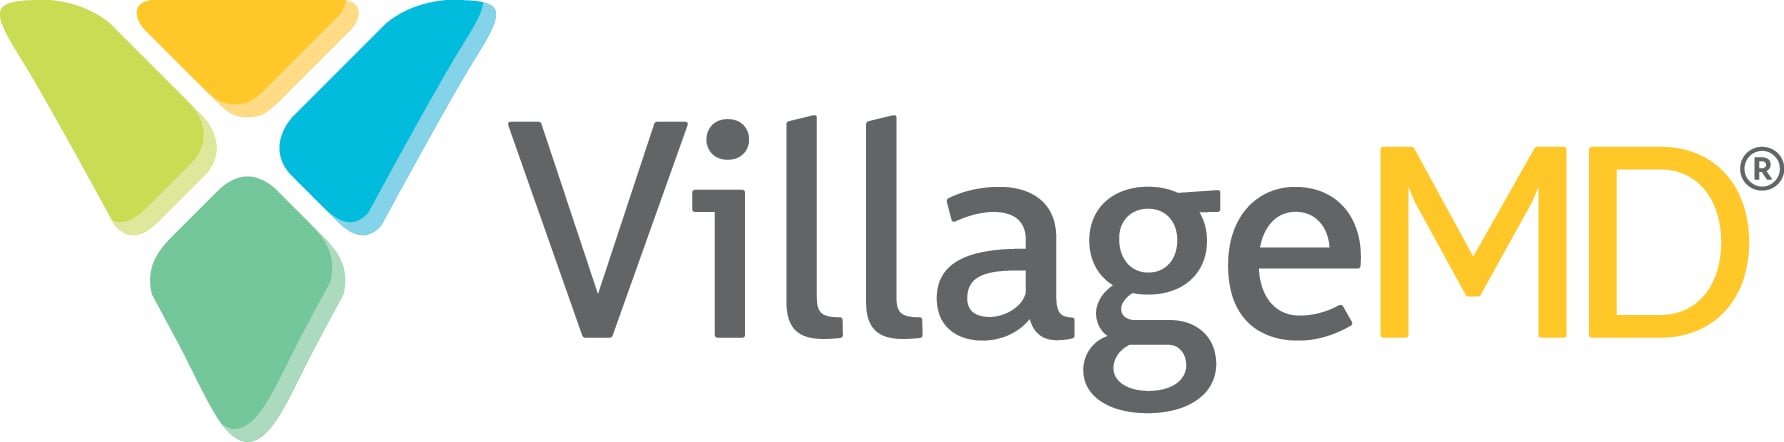 VillageMD Welcomes Envision Medical Group as Village Medical and Continues Growth in Michigan